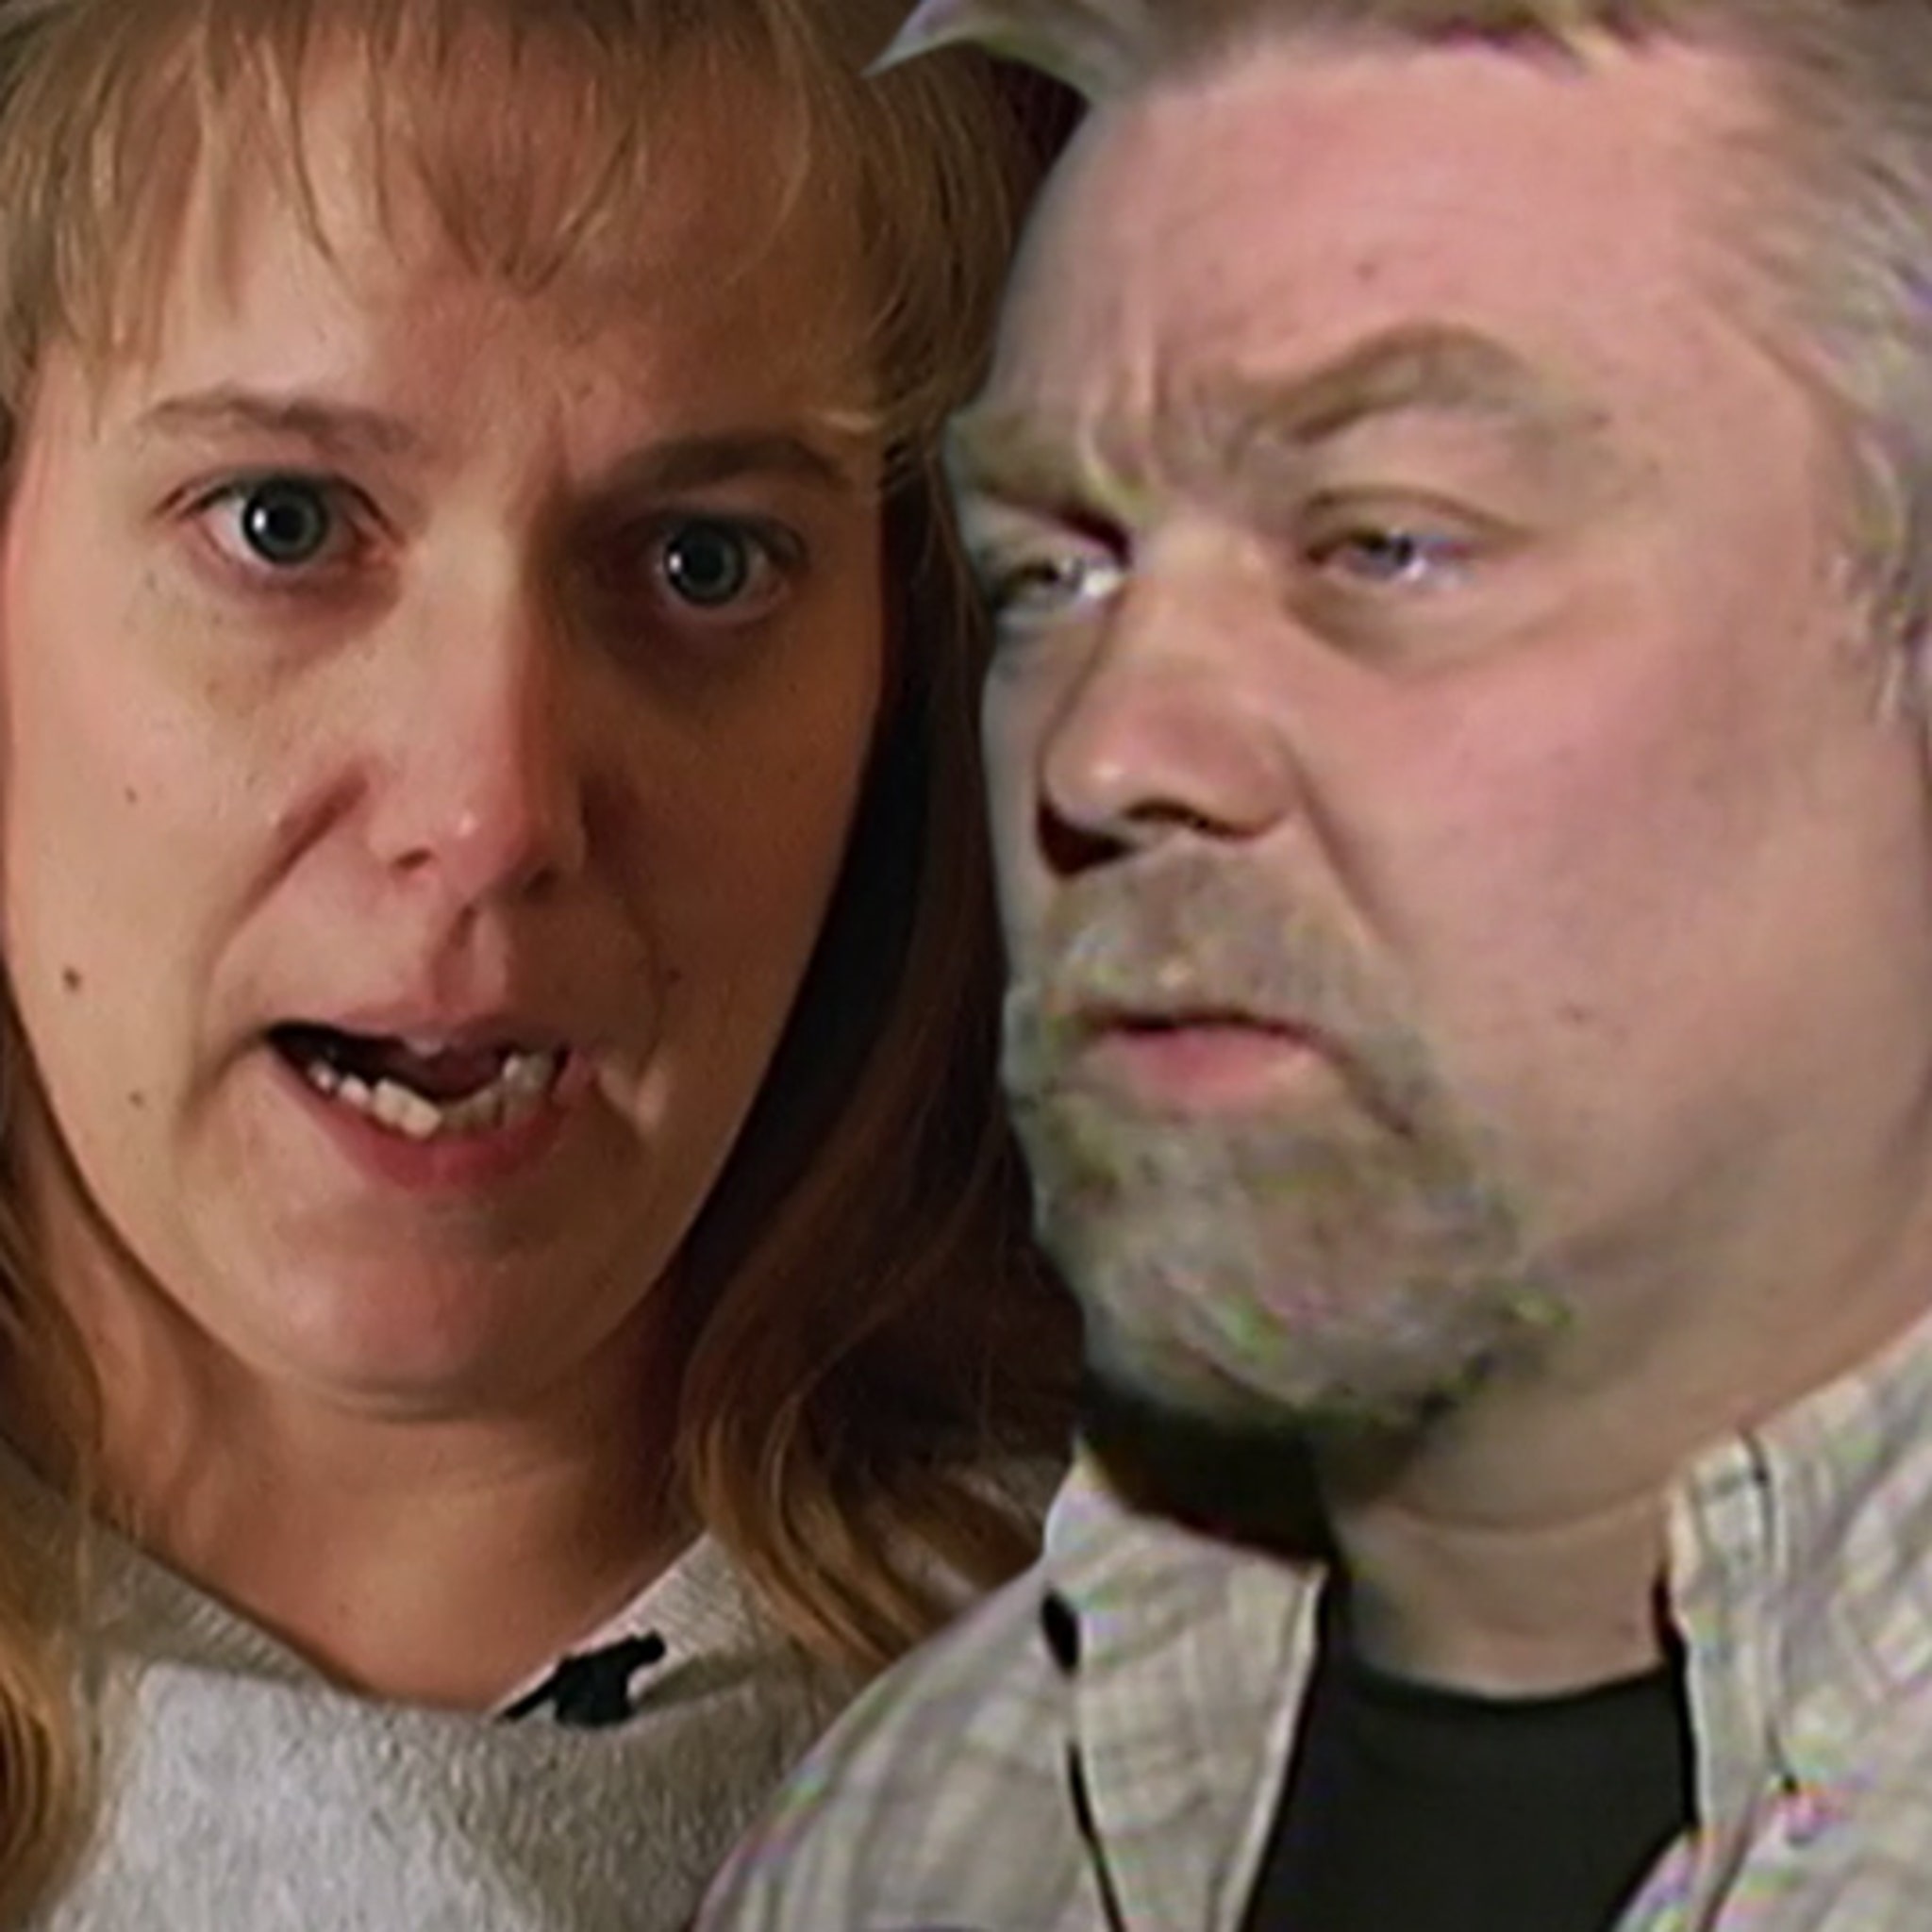 Steven Avery's Ex-Fiancee: Steven Tied Me To The Bed Too